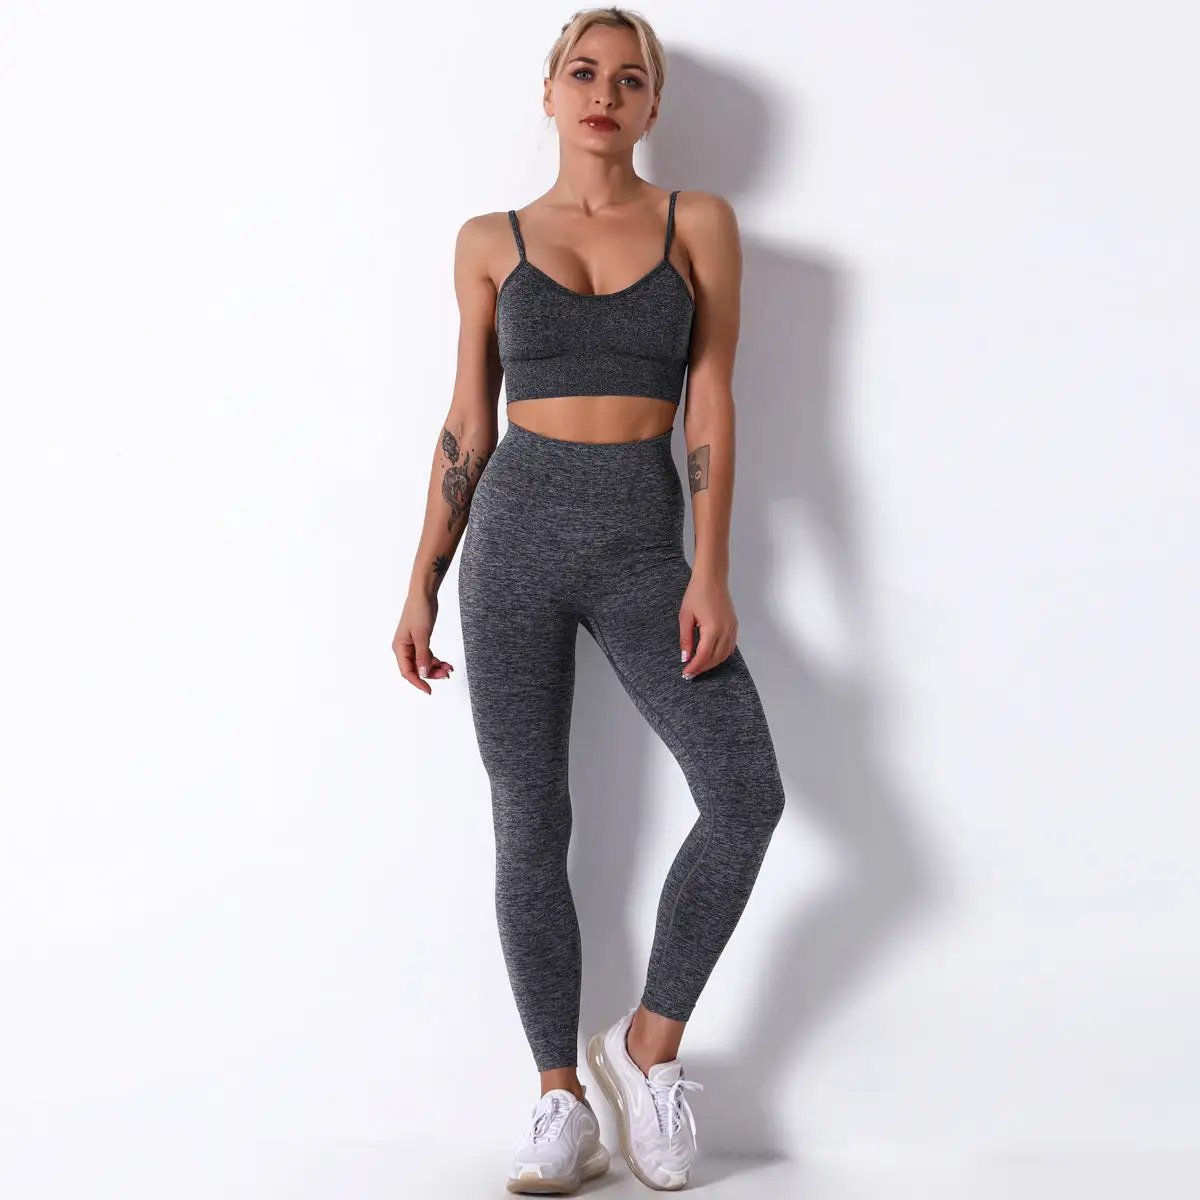 WILKYs0Yoga Pants Fitness Running Yoga Clothes Sports
 Product information:
 


 Fabric name: cotton blended
 
 Fabric composition: nylon/nylon
 
 Fabric composition content: 90 (%)
 
 Lining name: Lycra
 
 Lining comp